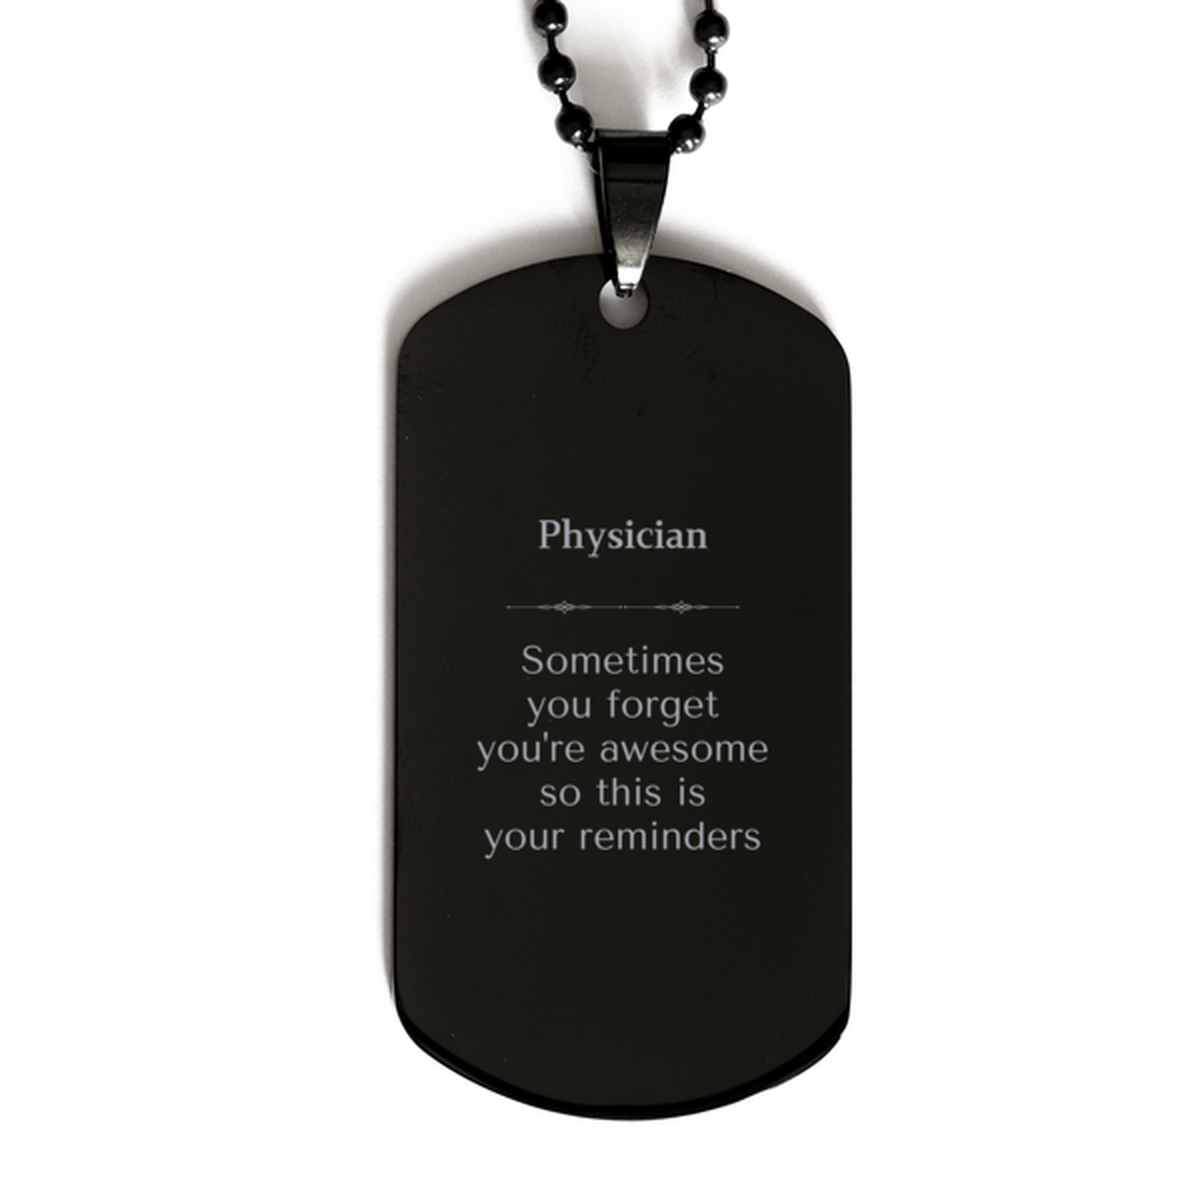 Sentimental Physician Black Dog Tag, Physician Sometimes you forget you're awesome so this is your reminders, Graduation Christmas Birthday Gifts for Physician, Men, Women, Coworkers